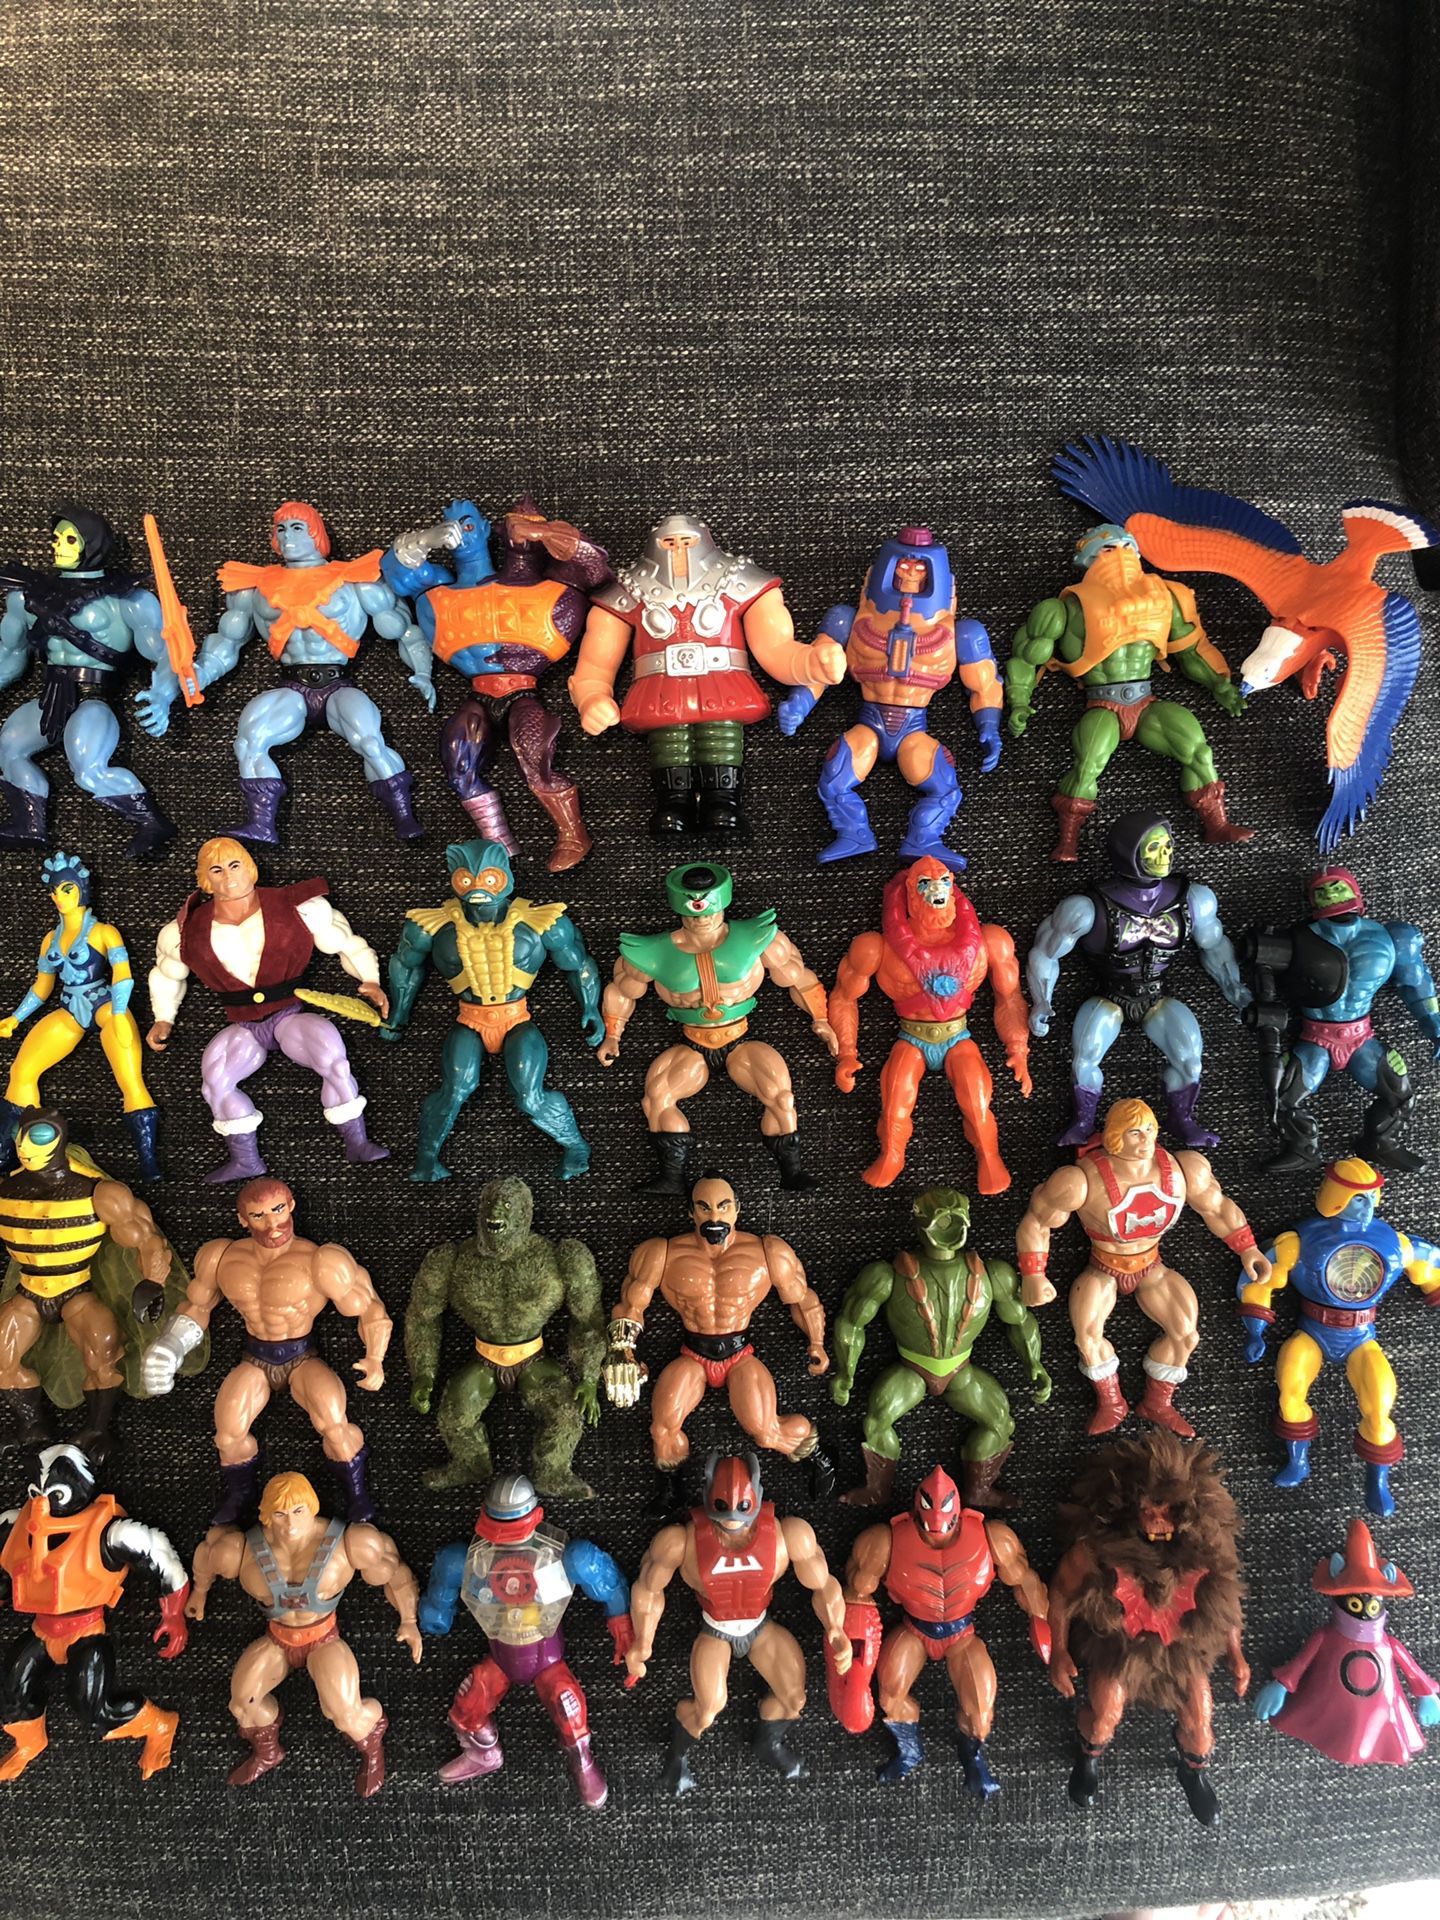 HE-MAN action figures and comic books